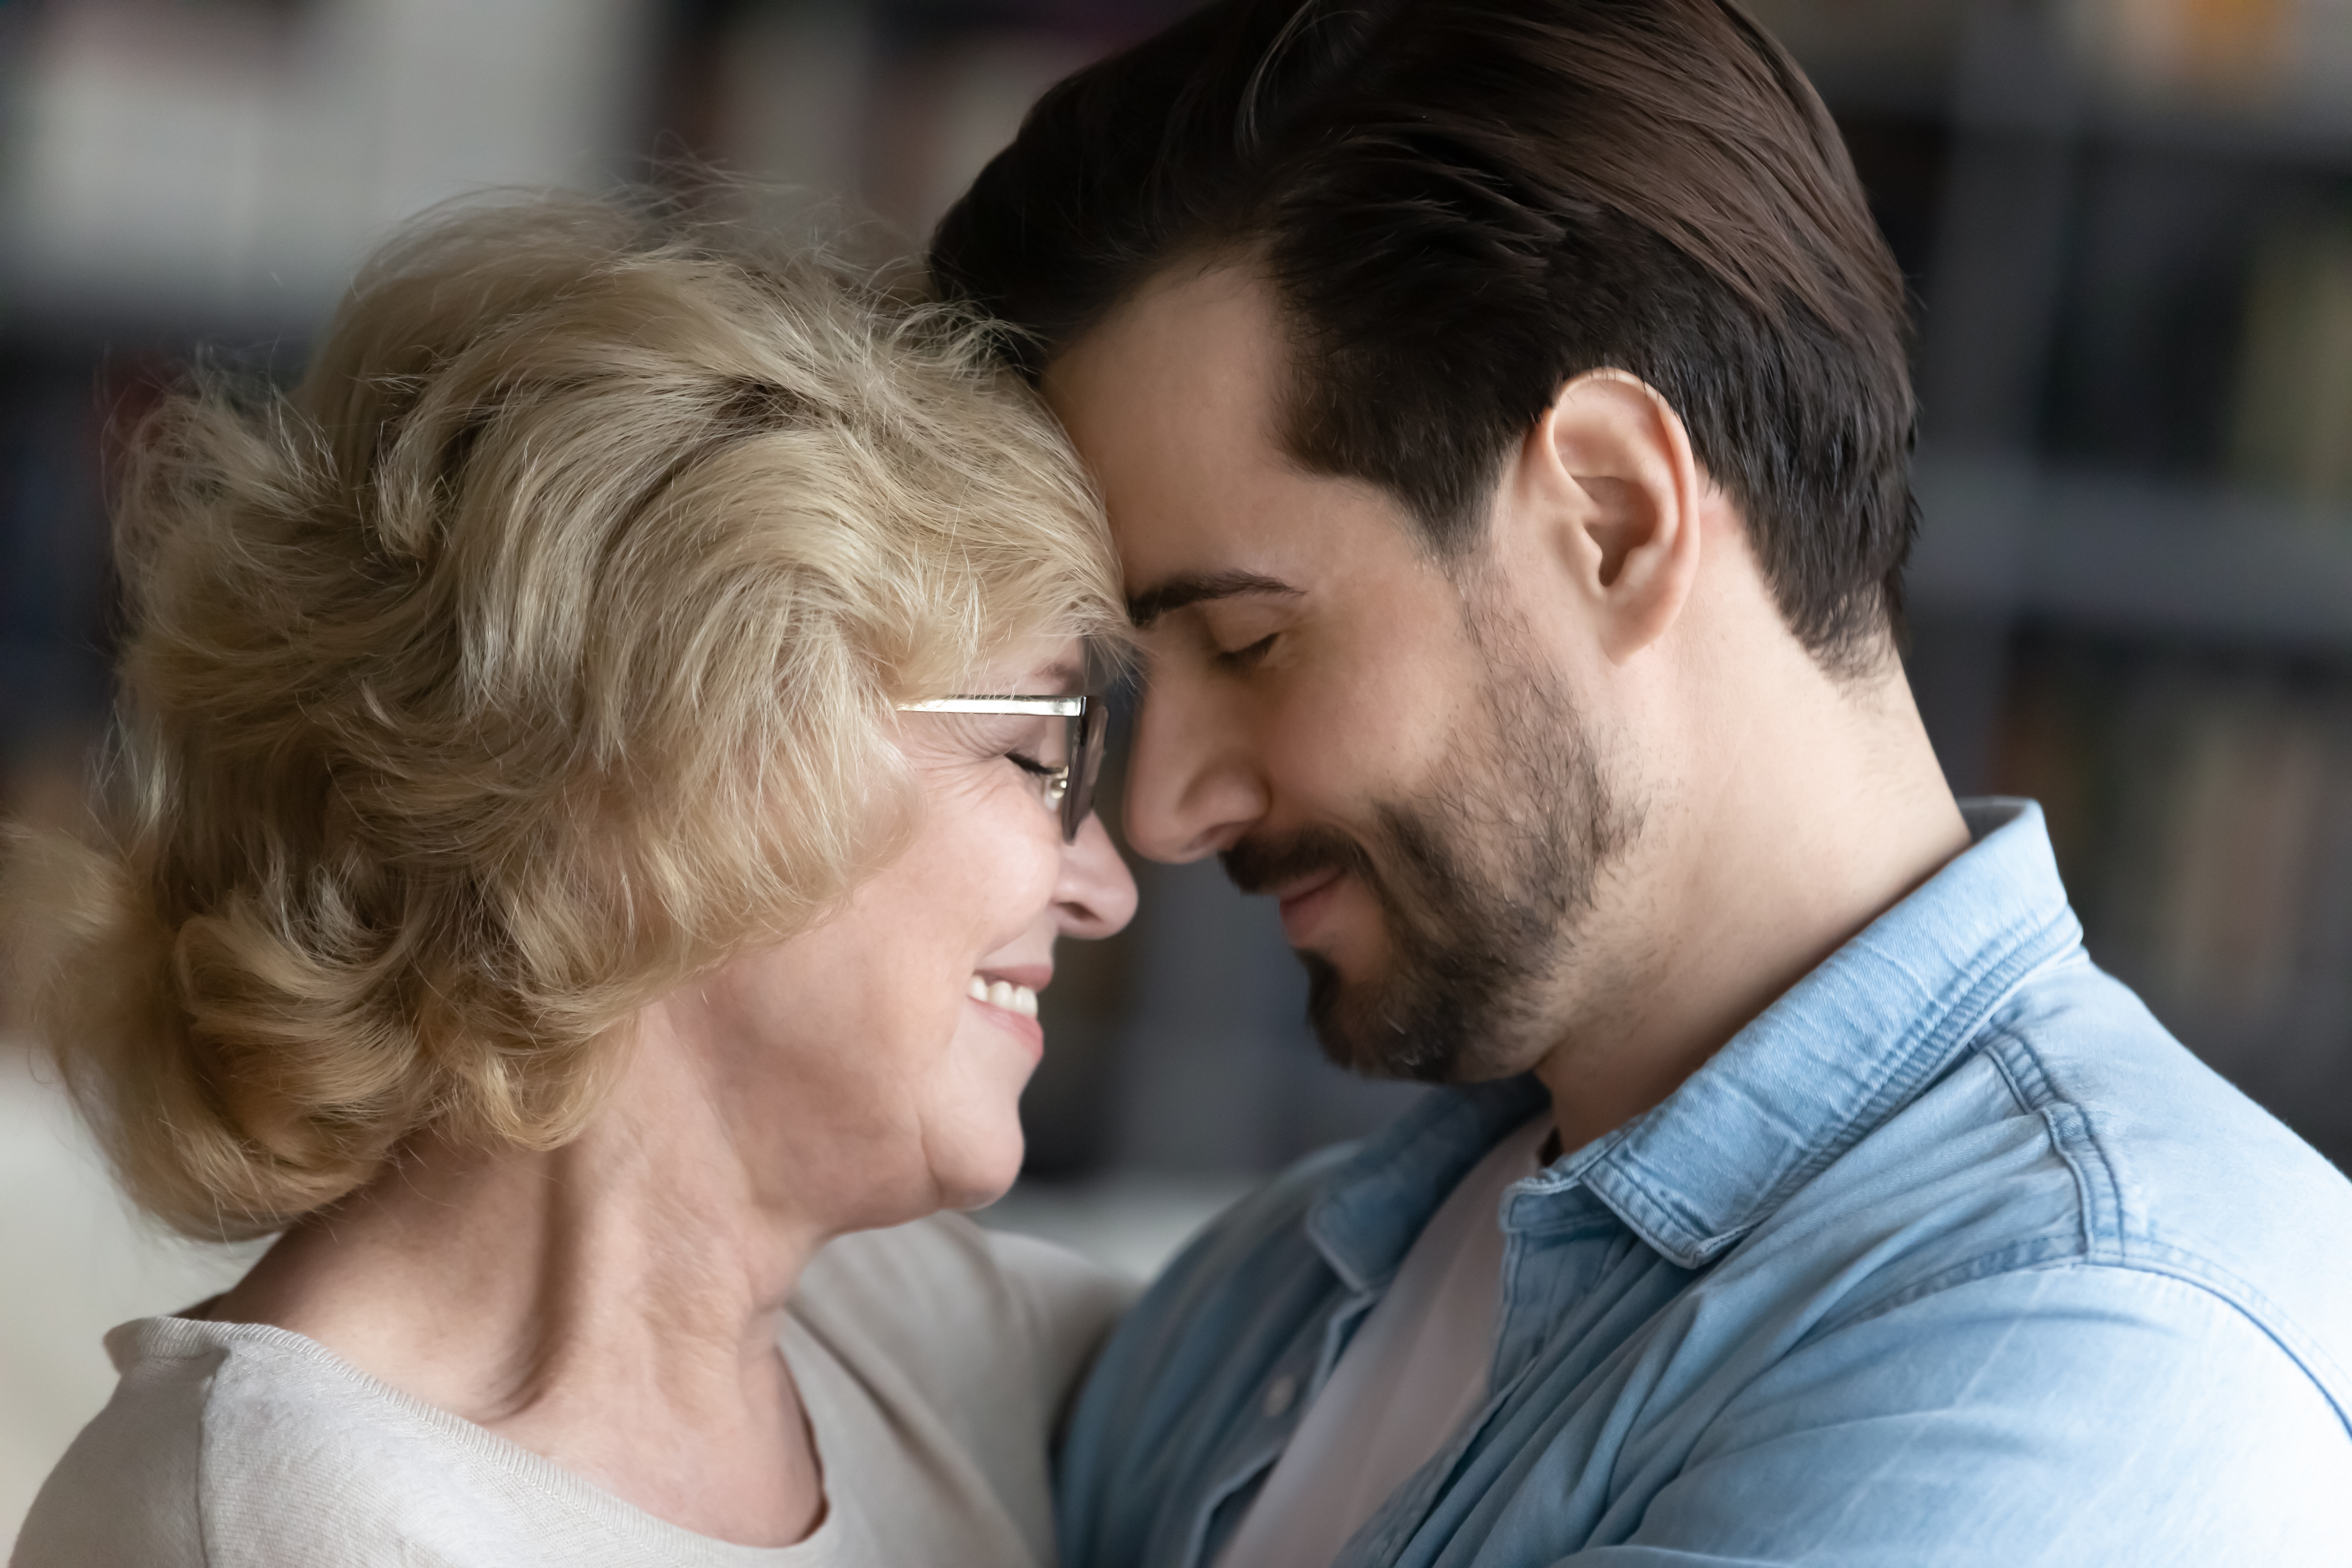 An adult son sharing a tender moment with his senior mom | Source: Shutterstock